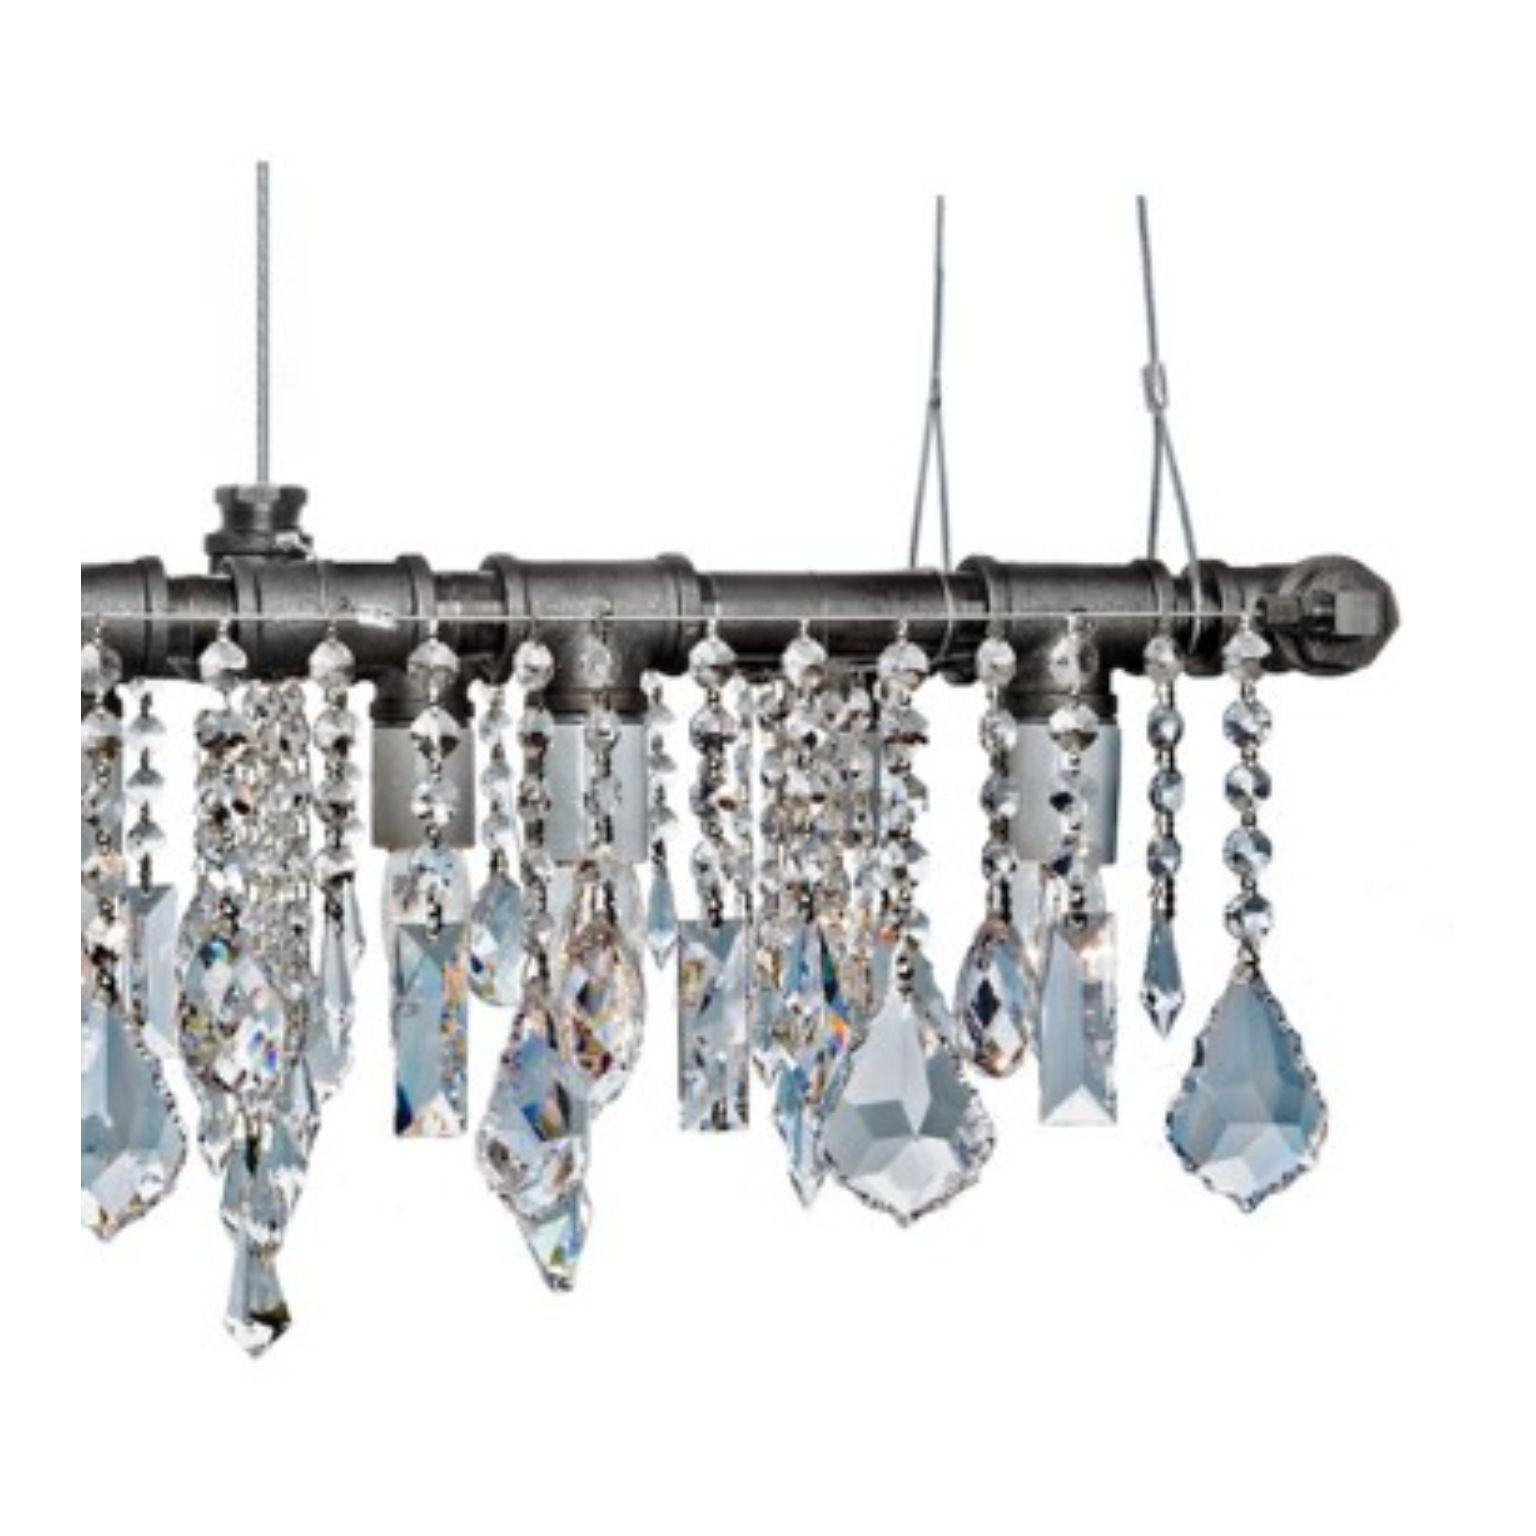 Post-Modern Industrial Mini-Banqueting Linear Suspension Chandelier by Michael McHale For Sale